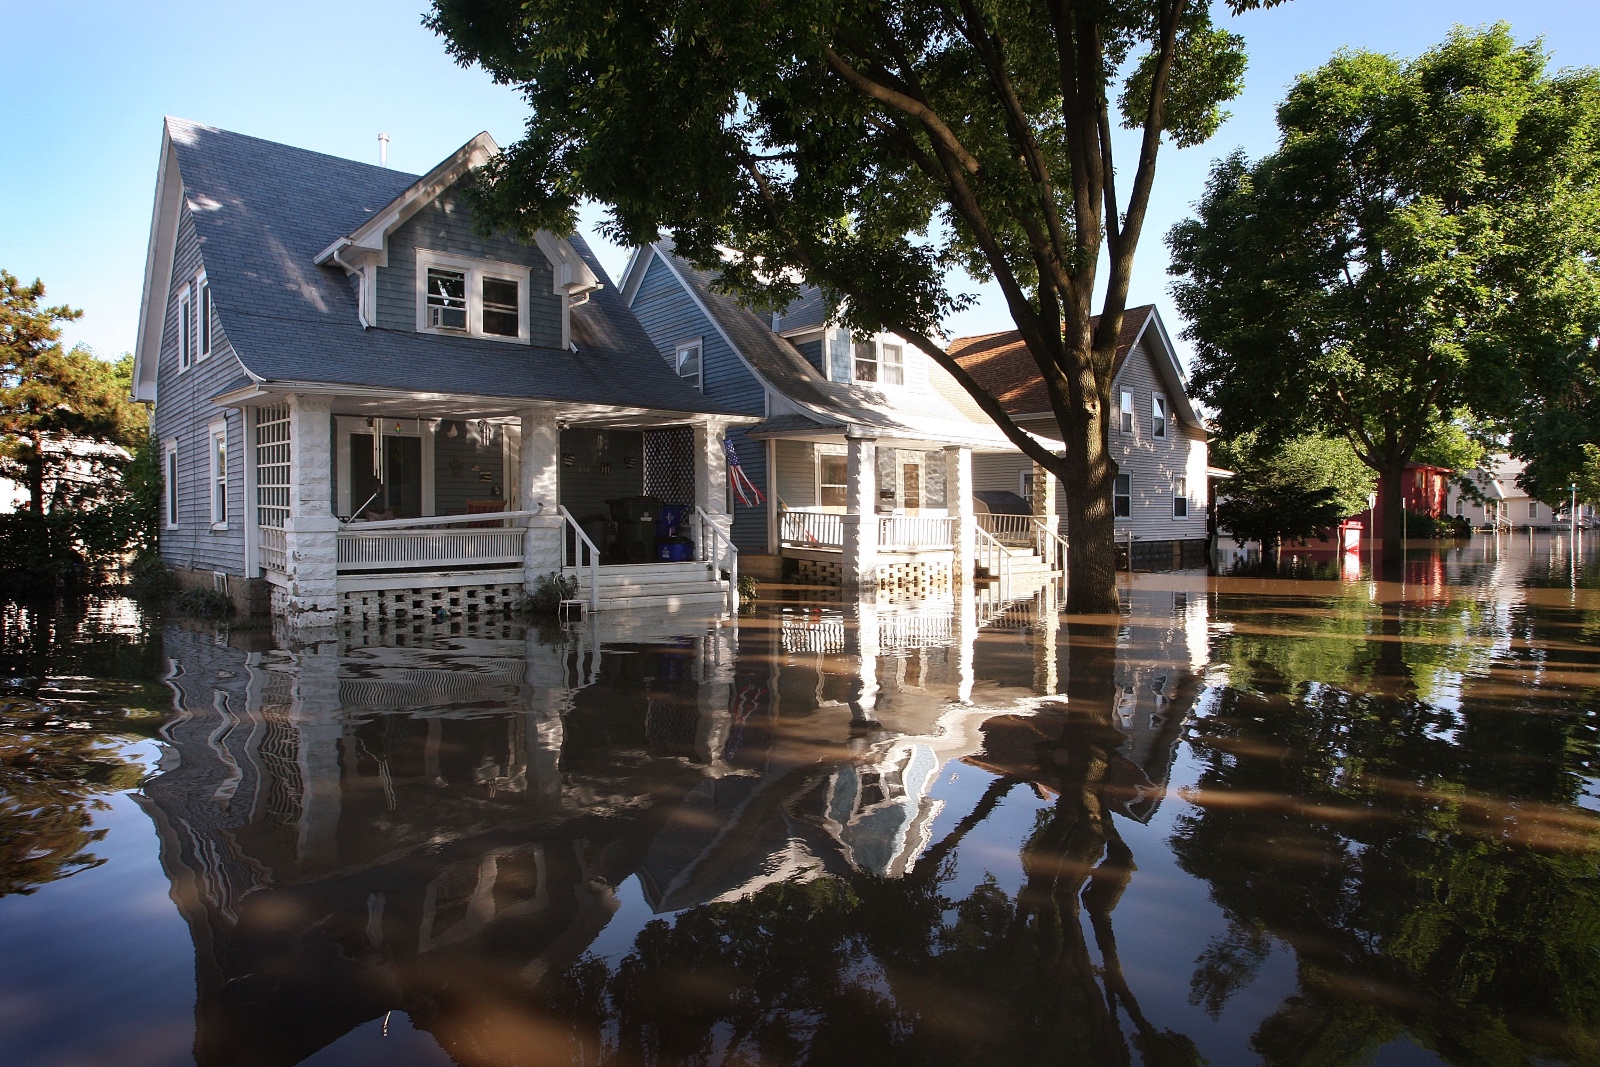 A row of homes on a tree-lined residential street with flood water up to the porches